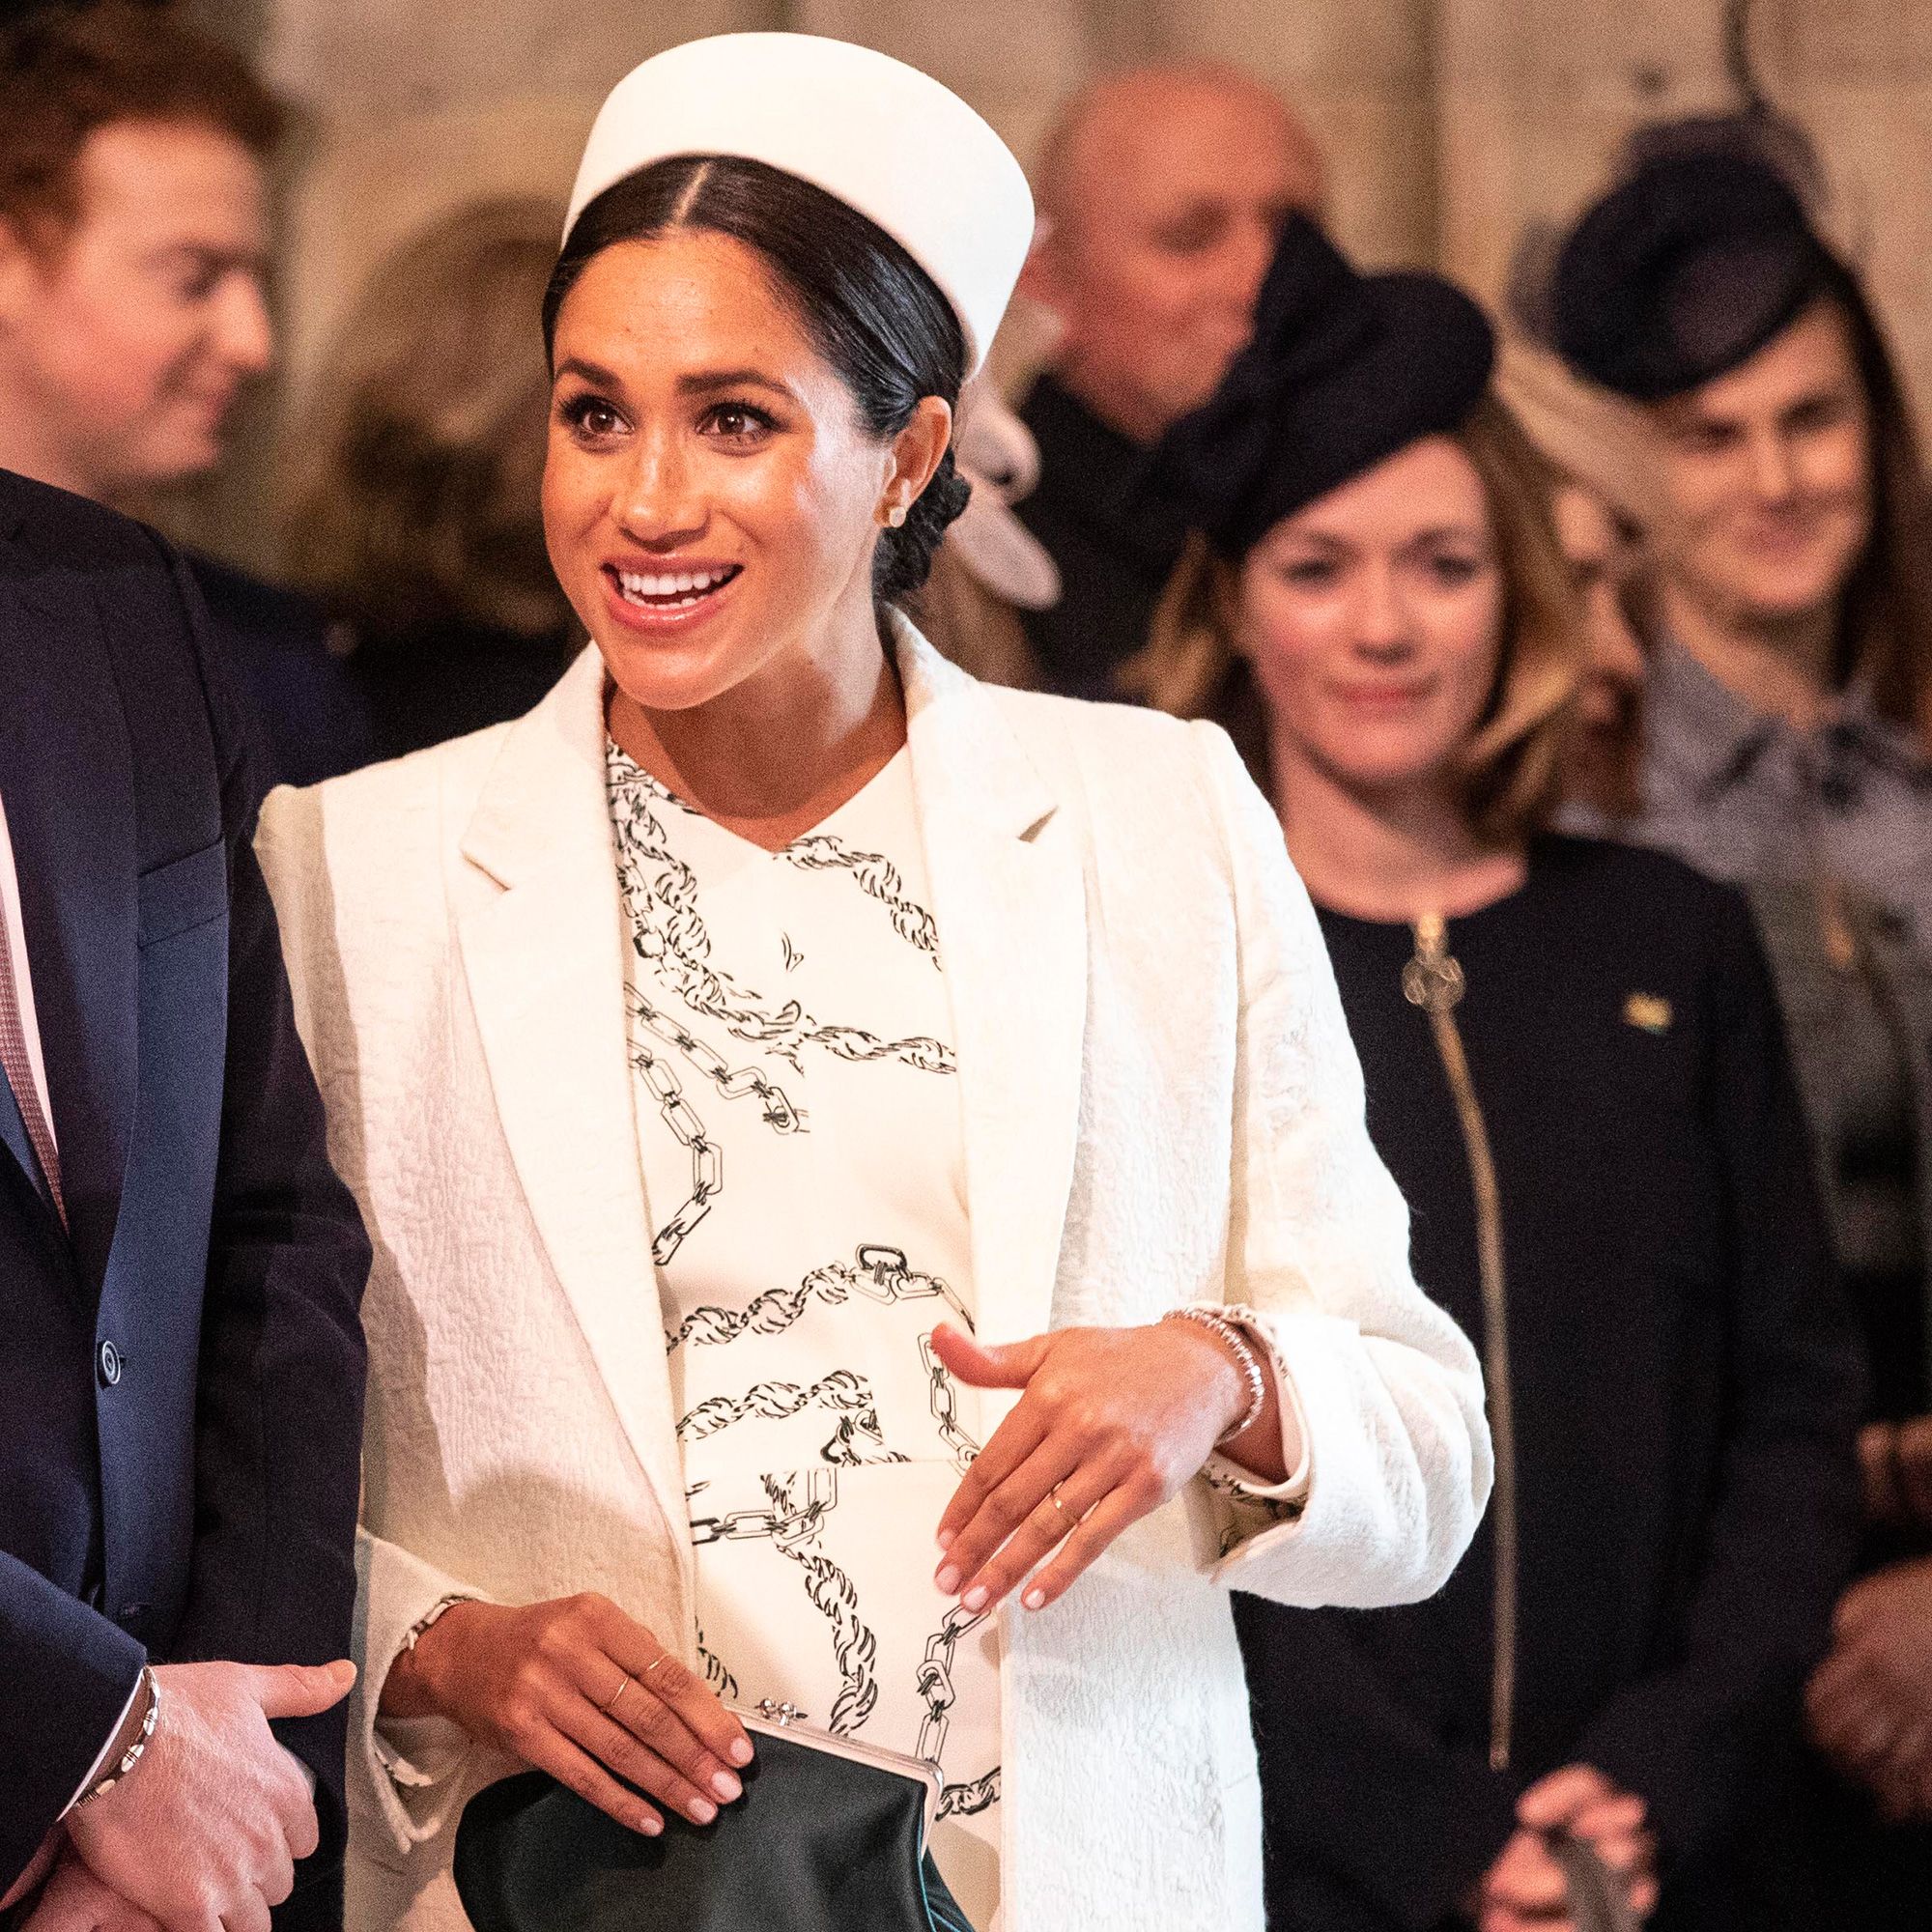 Meghan Markle, Kate Middleton and The Queen, engagement ring values  compared | Metro News